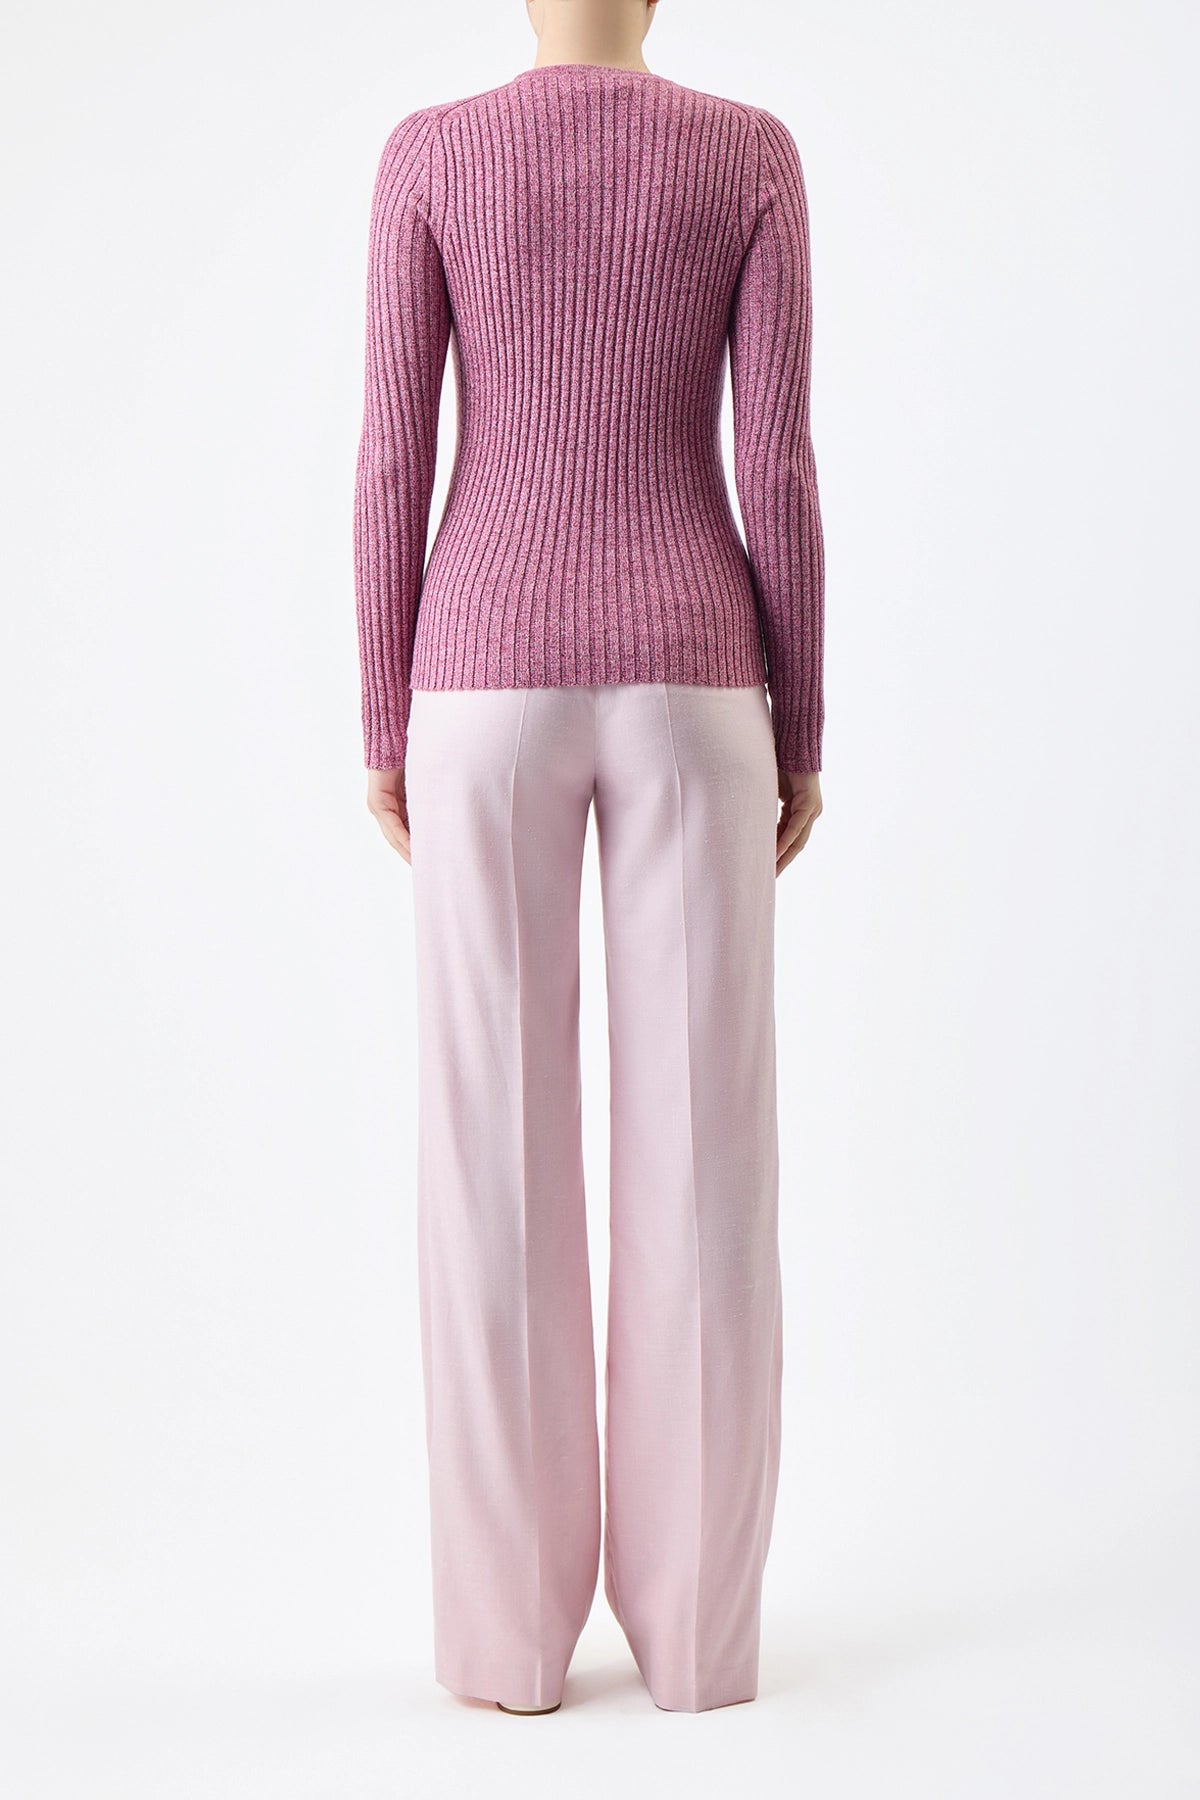 Willow Knit in Silk Cashmere